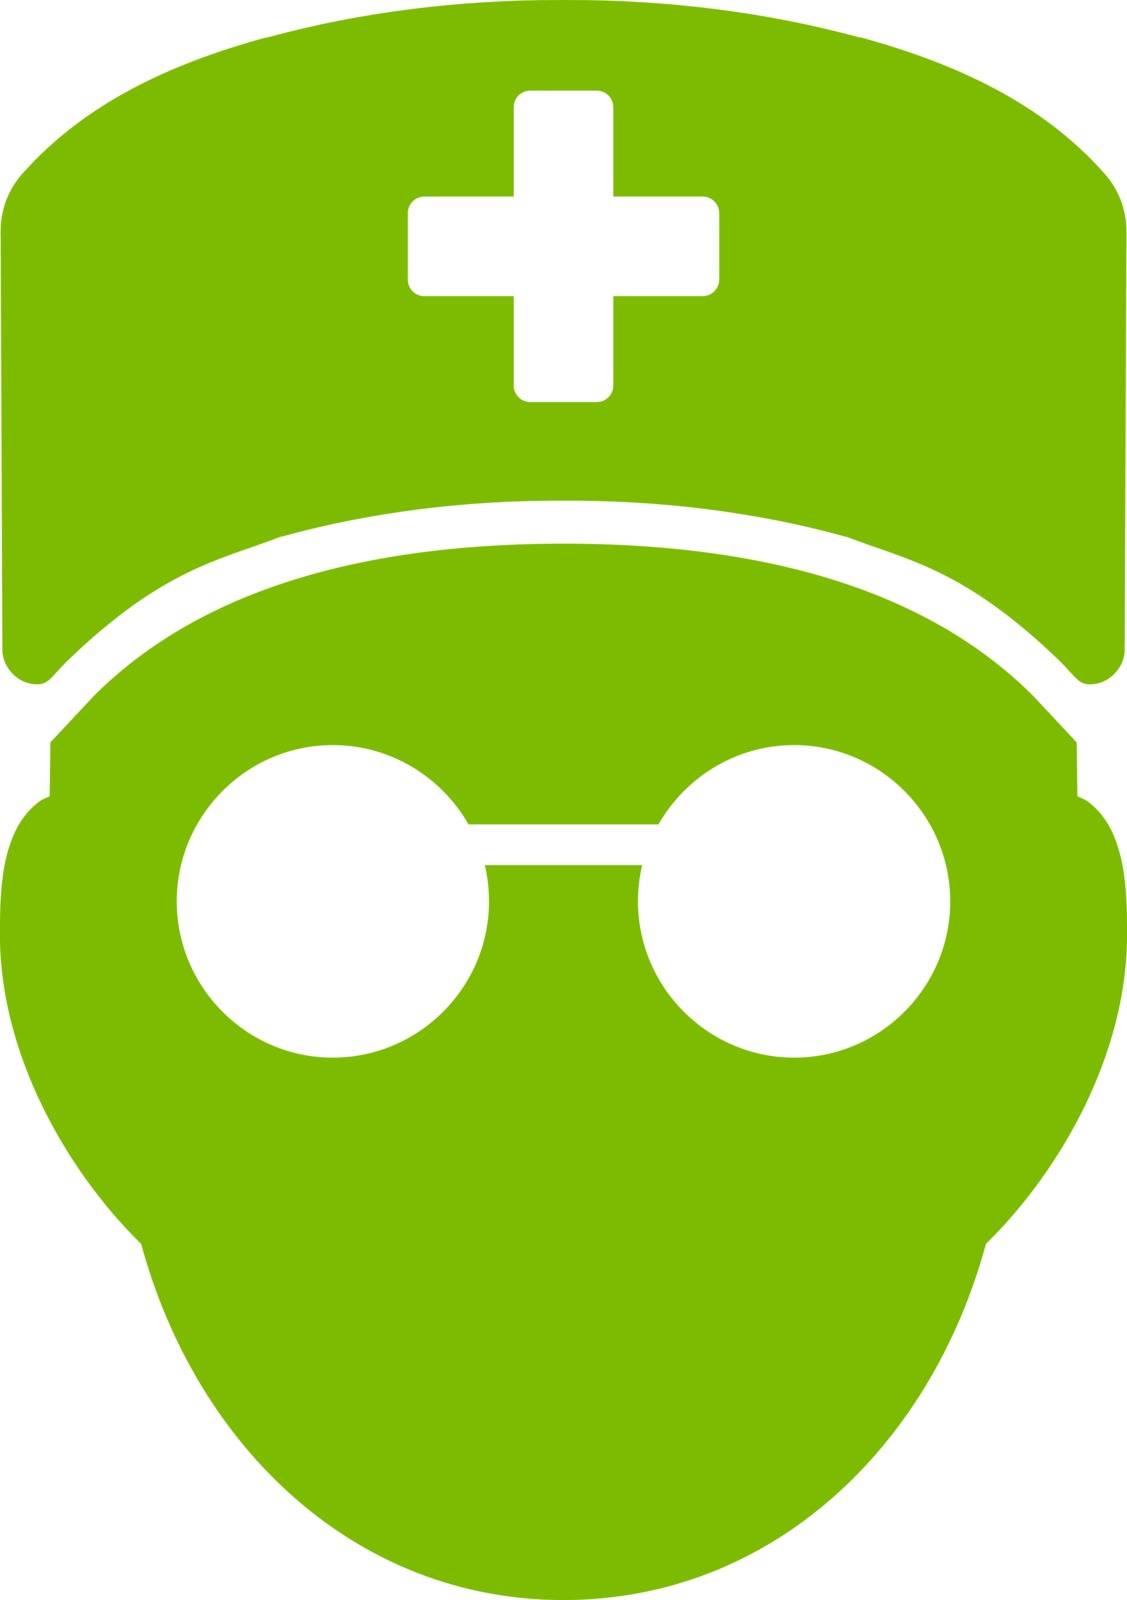 Medic Head vector icon. Style is flat symbol, eco green color, rounded angles, white background.